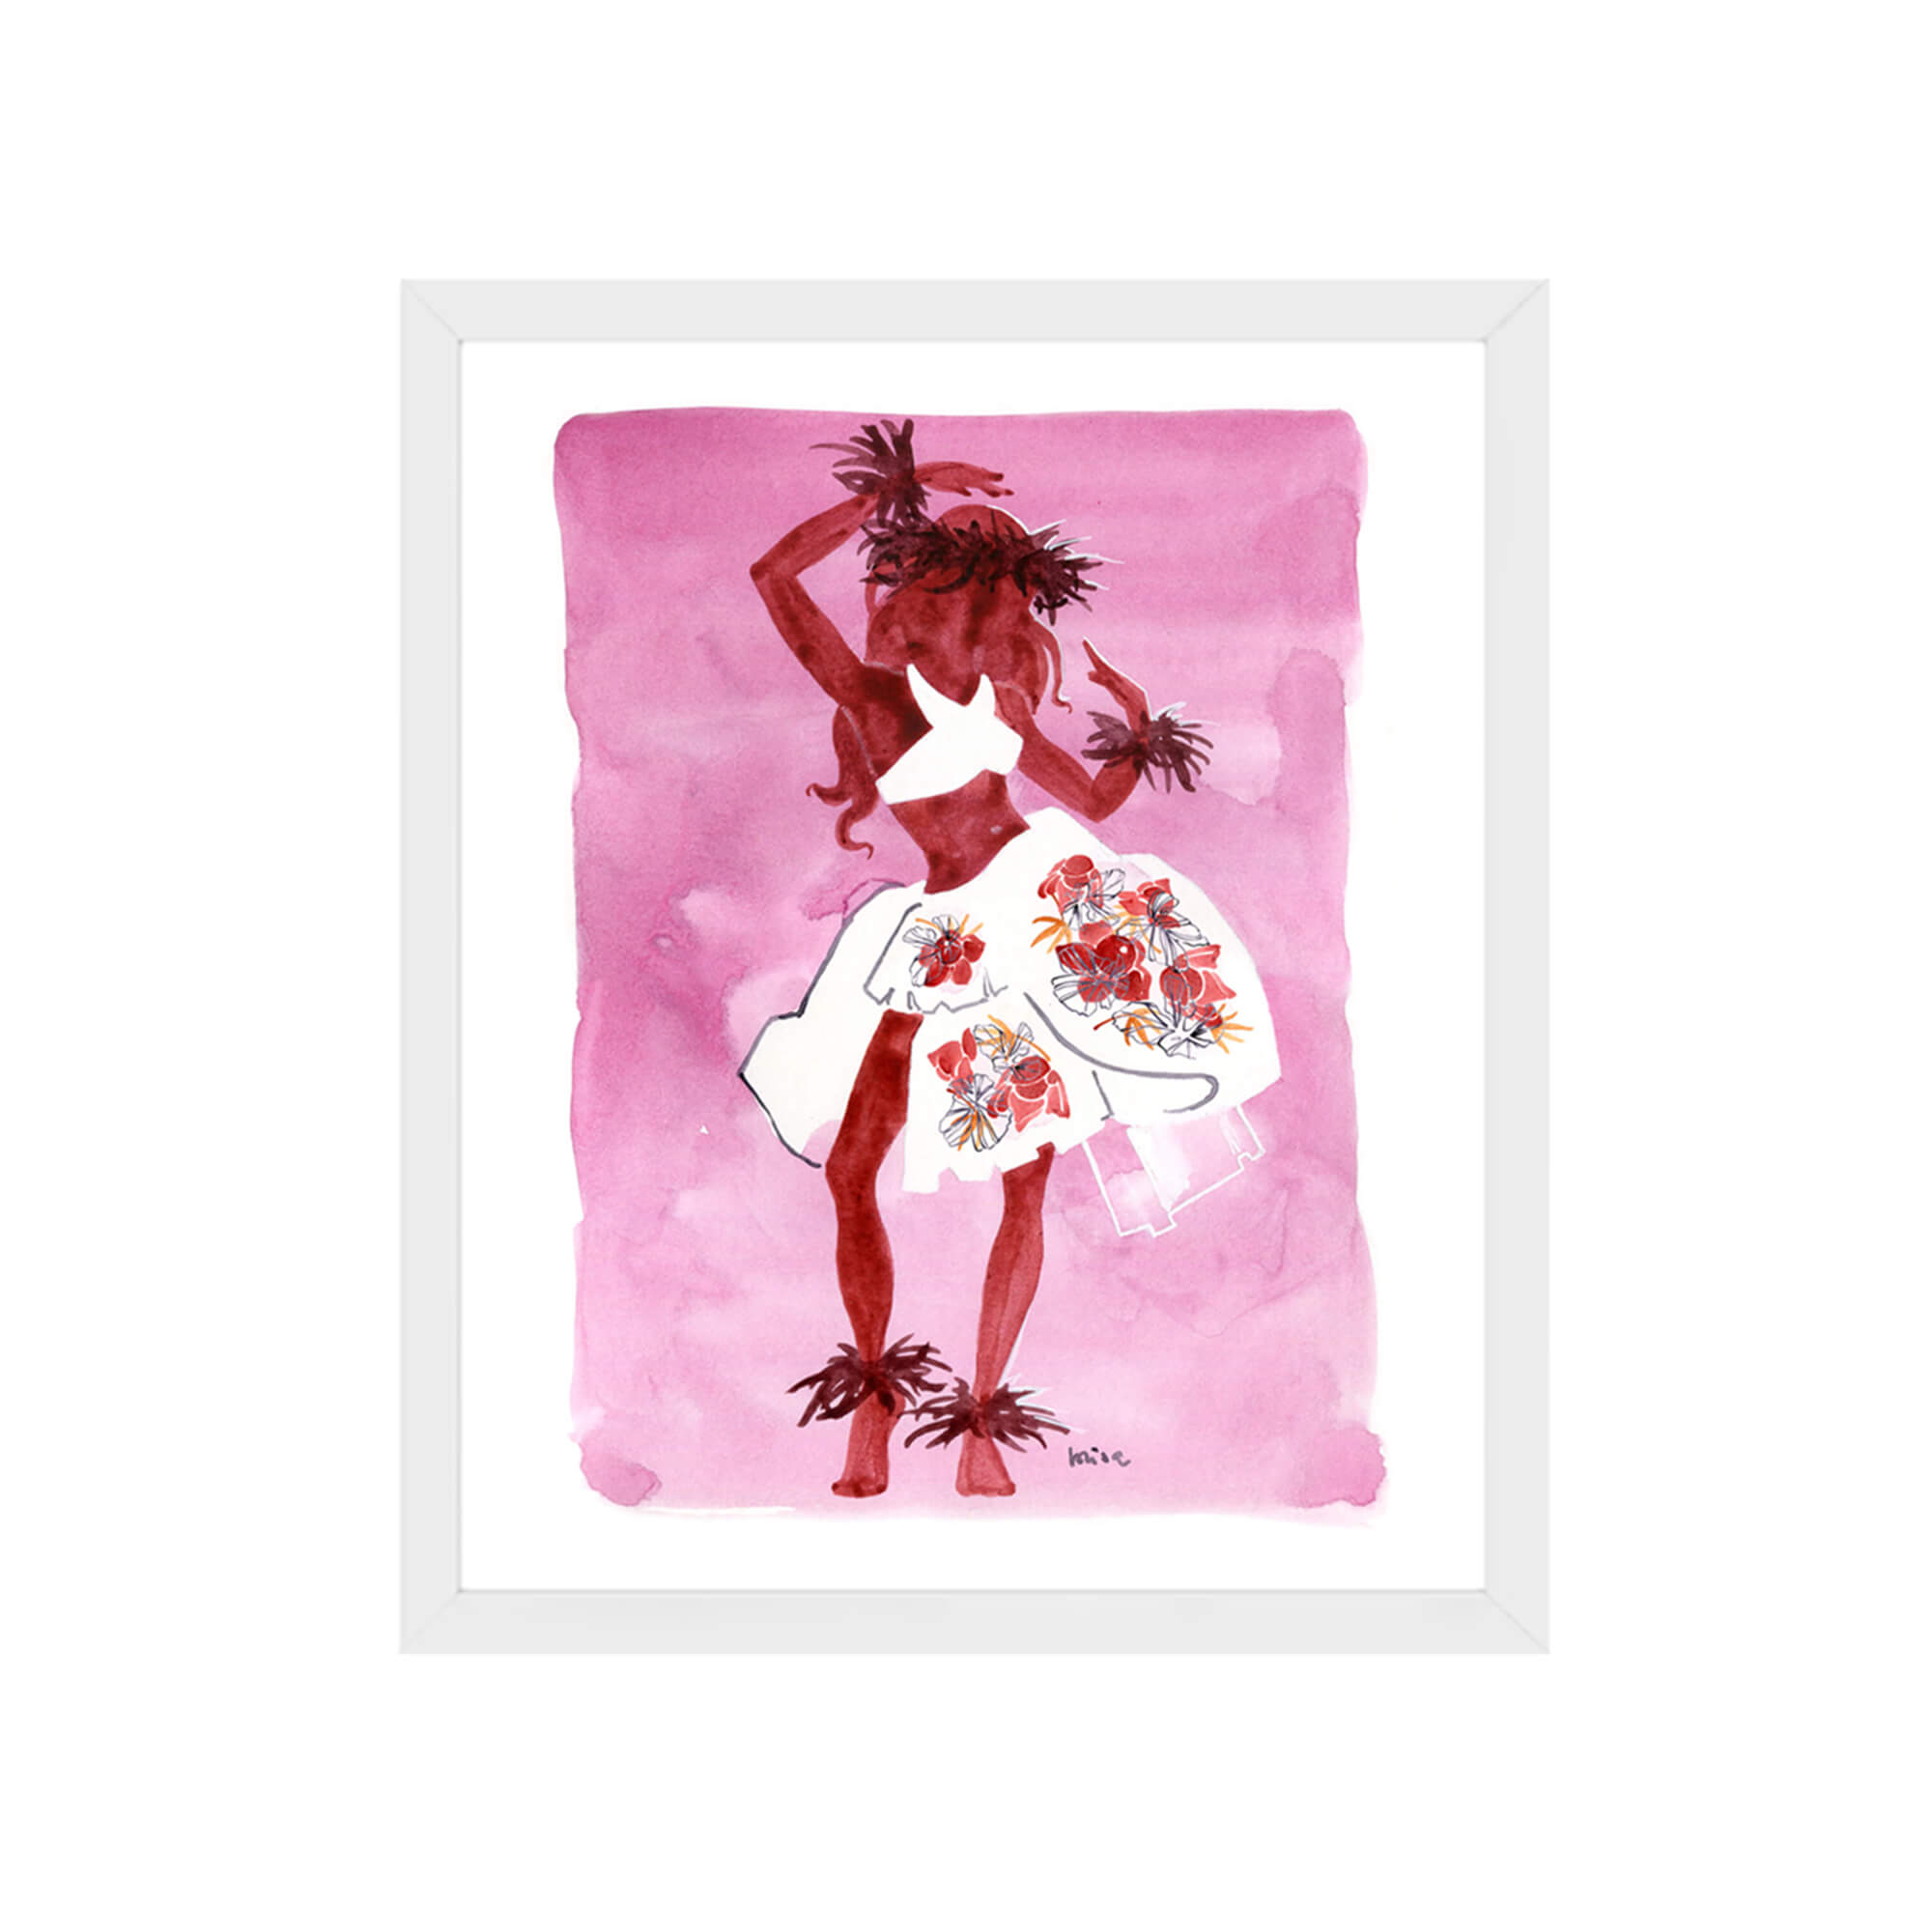 Framed paper giclée print of a watercolor artwork featuring a hula dancer on magenta background by Hawaii artist Lovisa Oliv